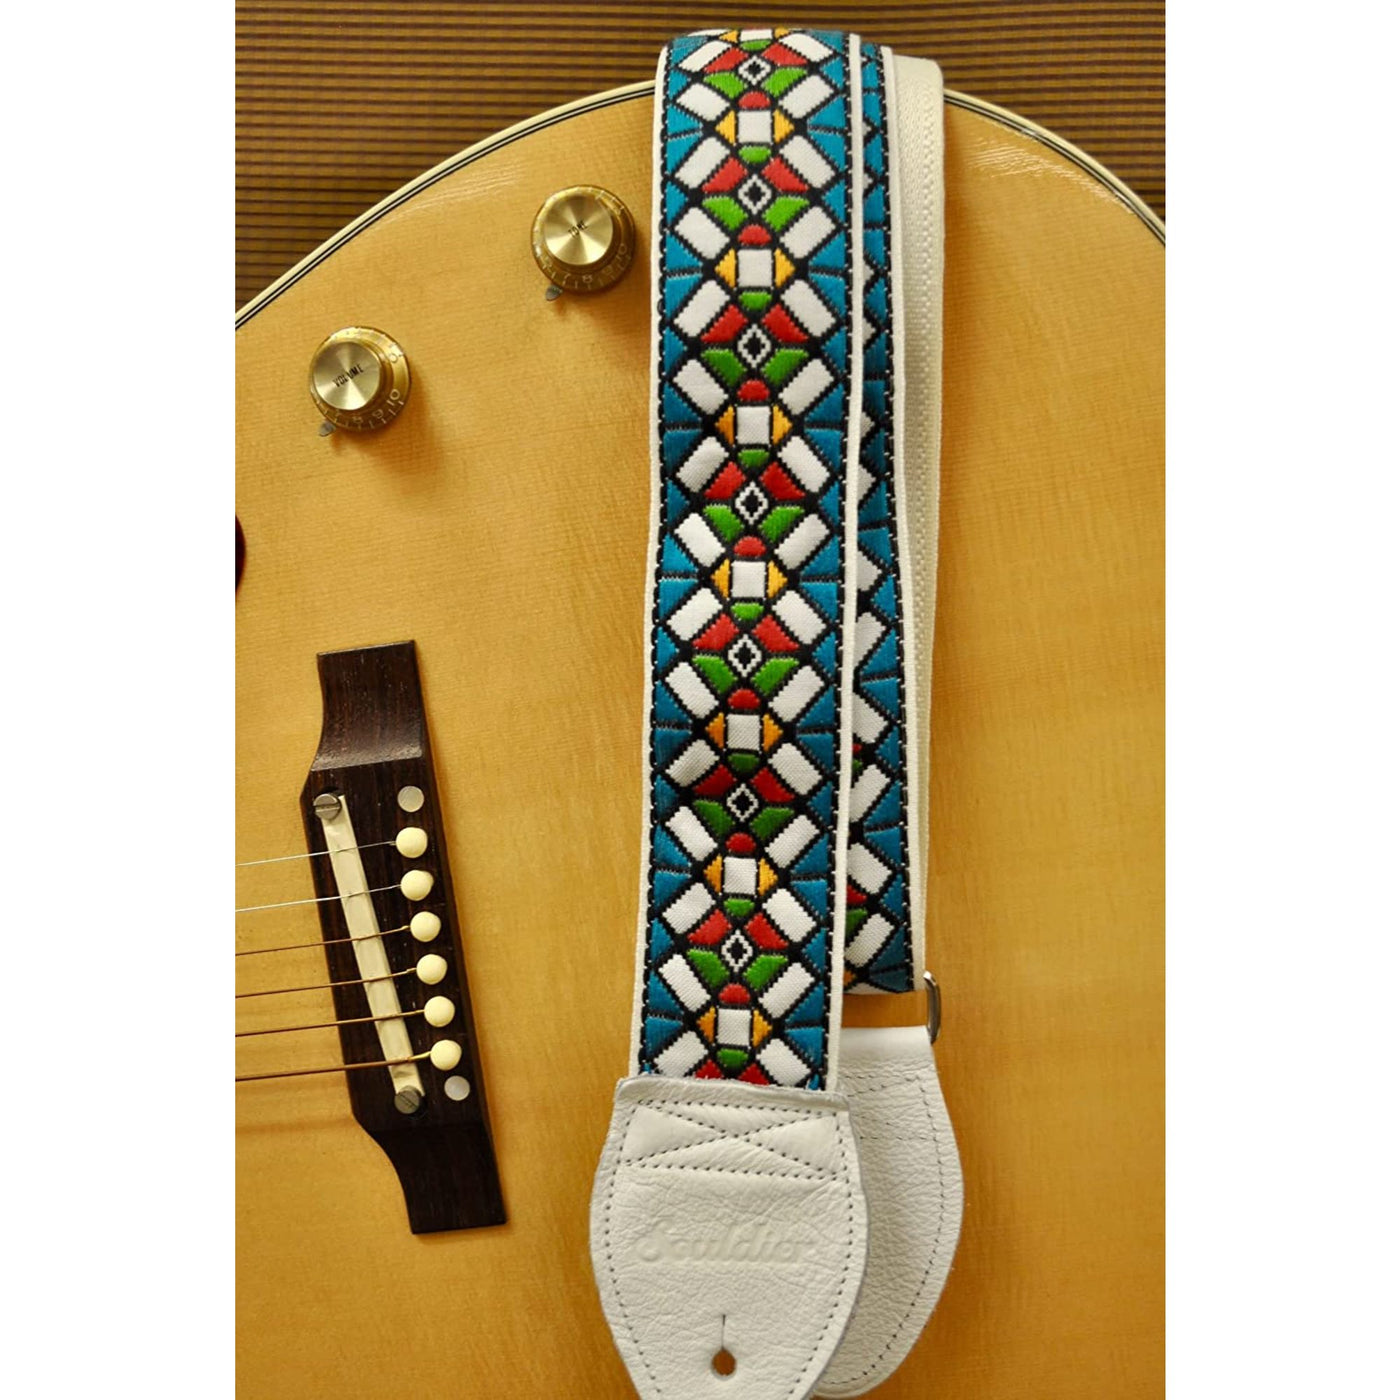 Souldier GS0178WH02WH - Handmade Seatbelt Guitar Strap for Bass, Electric or Acoustic Guitar, 2 Inches Wide and Adjustable Length from 30" to 63"  Made in the USA, Stained Glass, Red